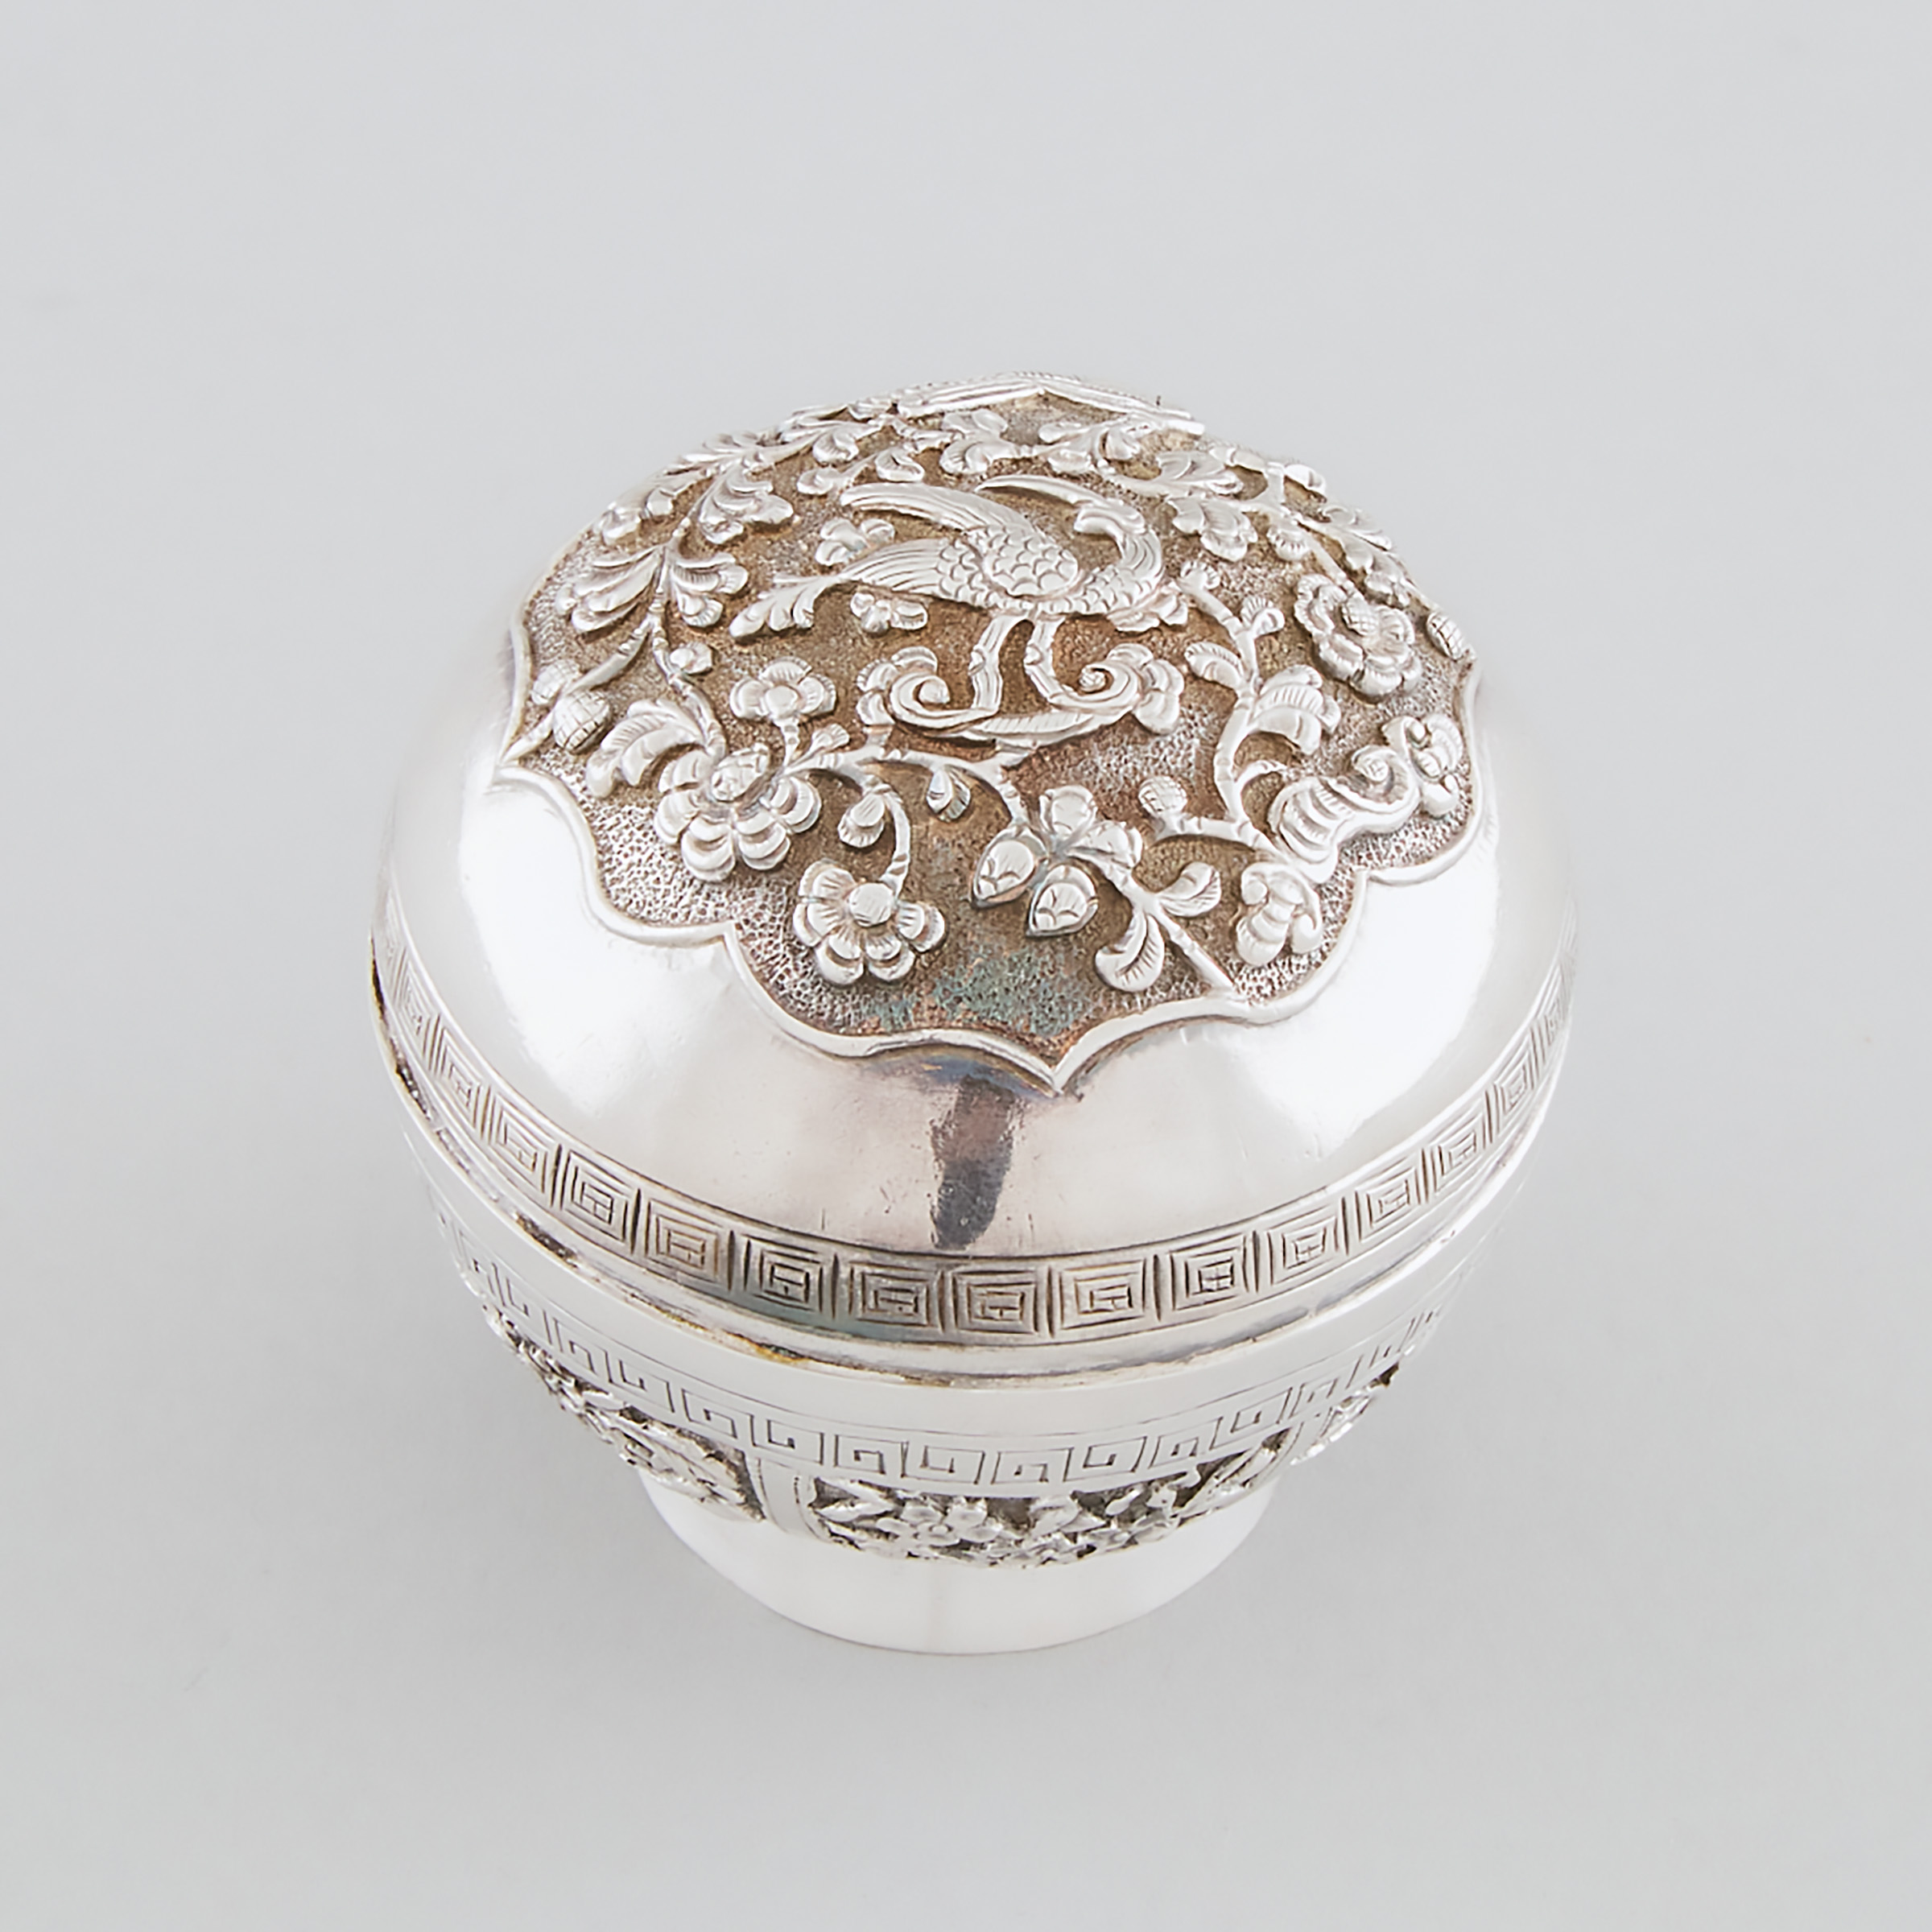 Chinese Export Silver Circular Box, early 20th century